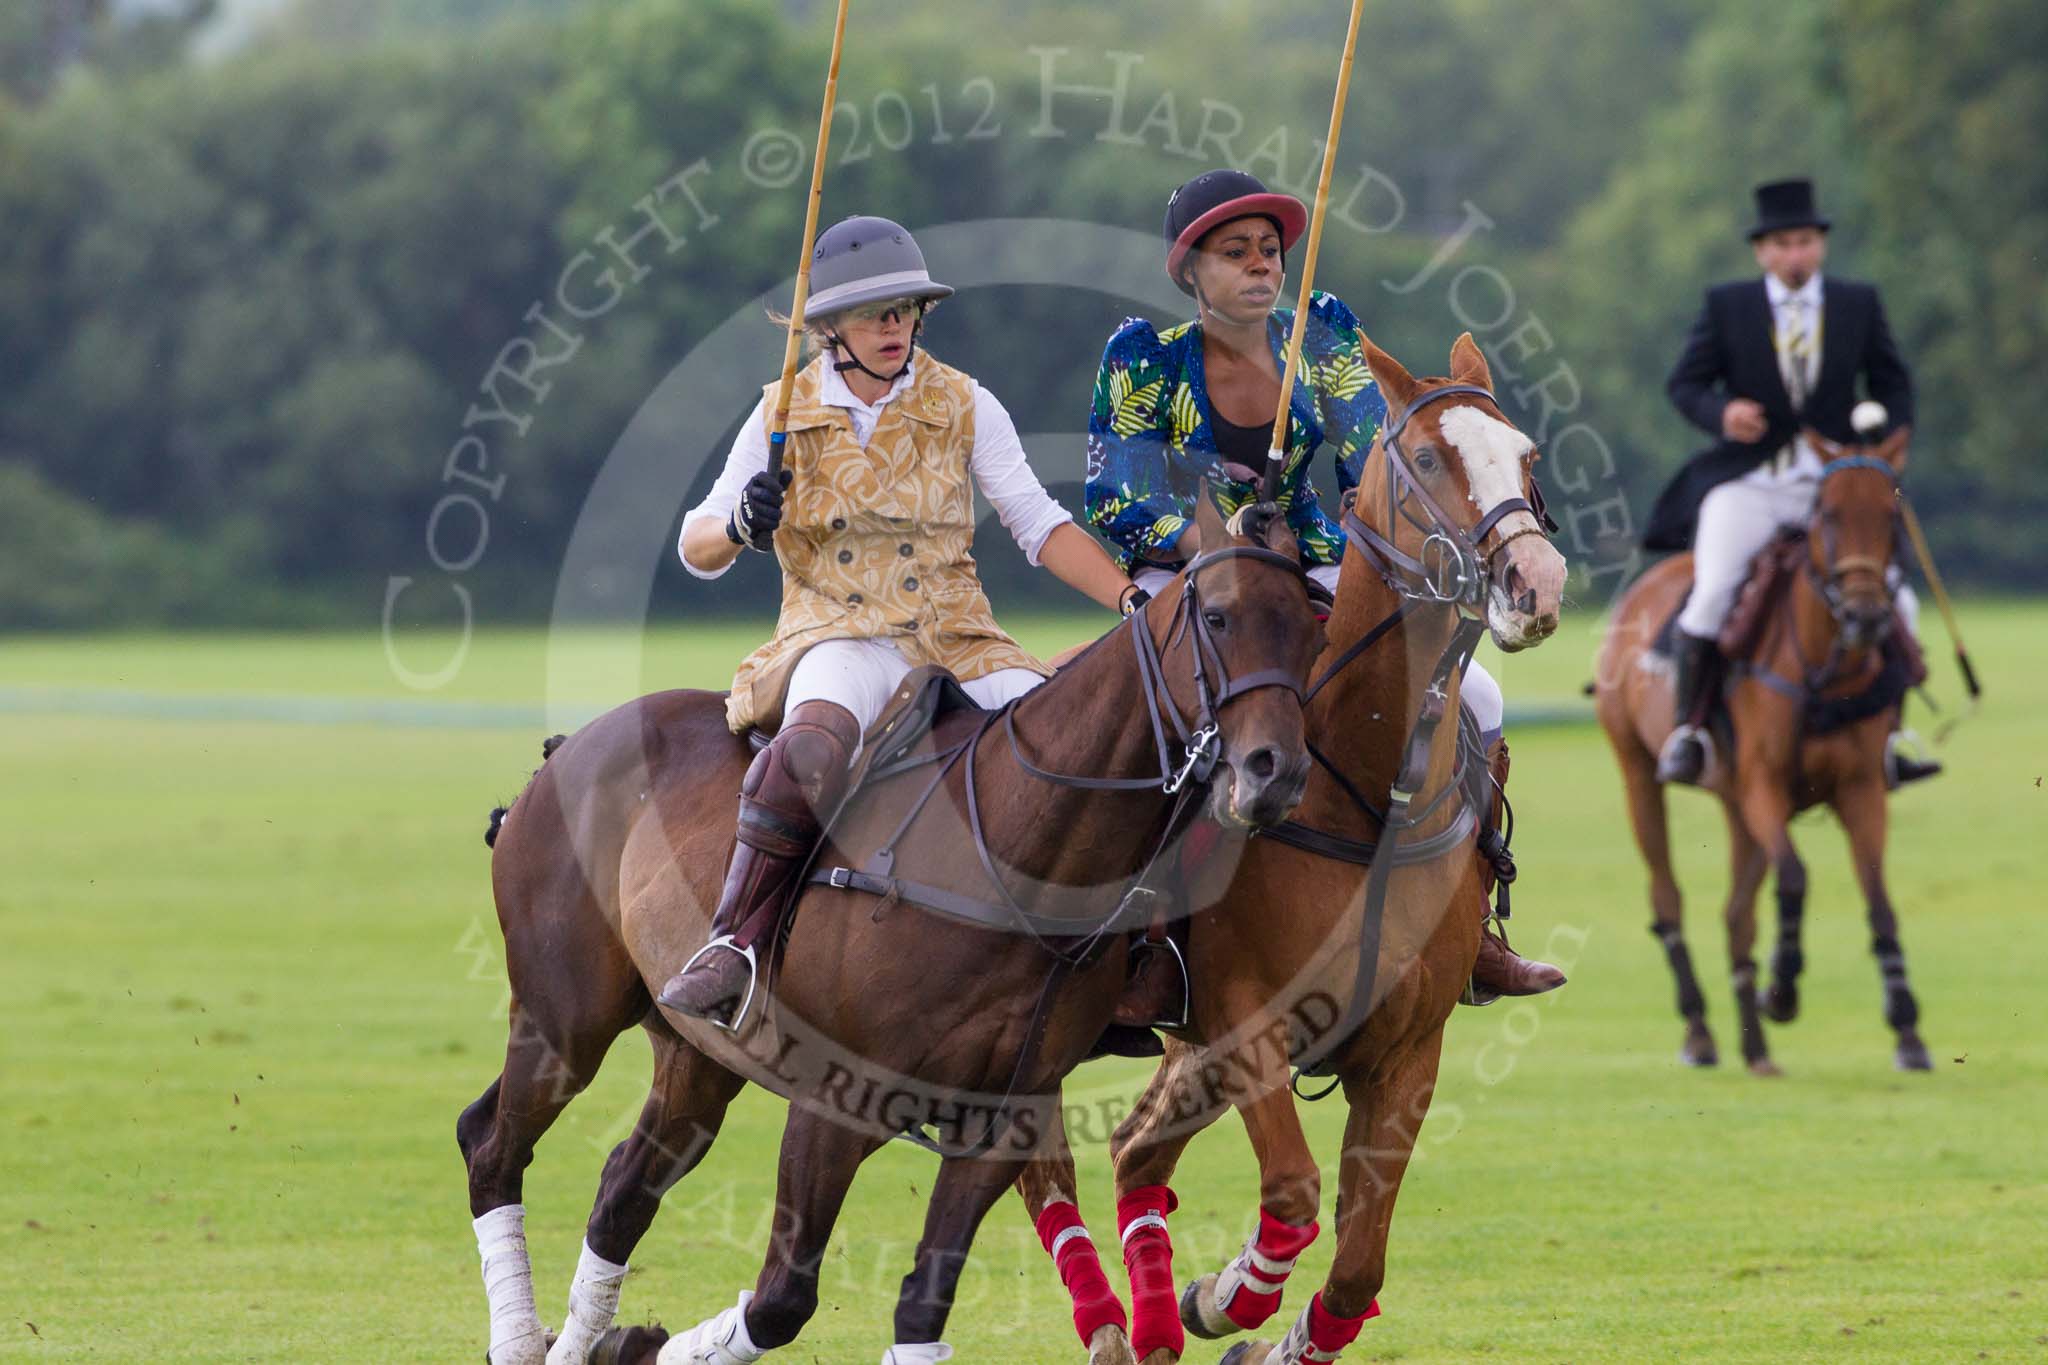 7th Heritage Polo Cup semi-finals: Emma Boers of the Amazons of Polo taking the man...Uneku Atawodi from Nigeria..
Hurtwood Park Polo Club,
Ewhurst Green,
Surrey,
United Kingdom,
on 04 August 2012 at 14:10, image #202